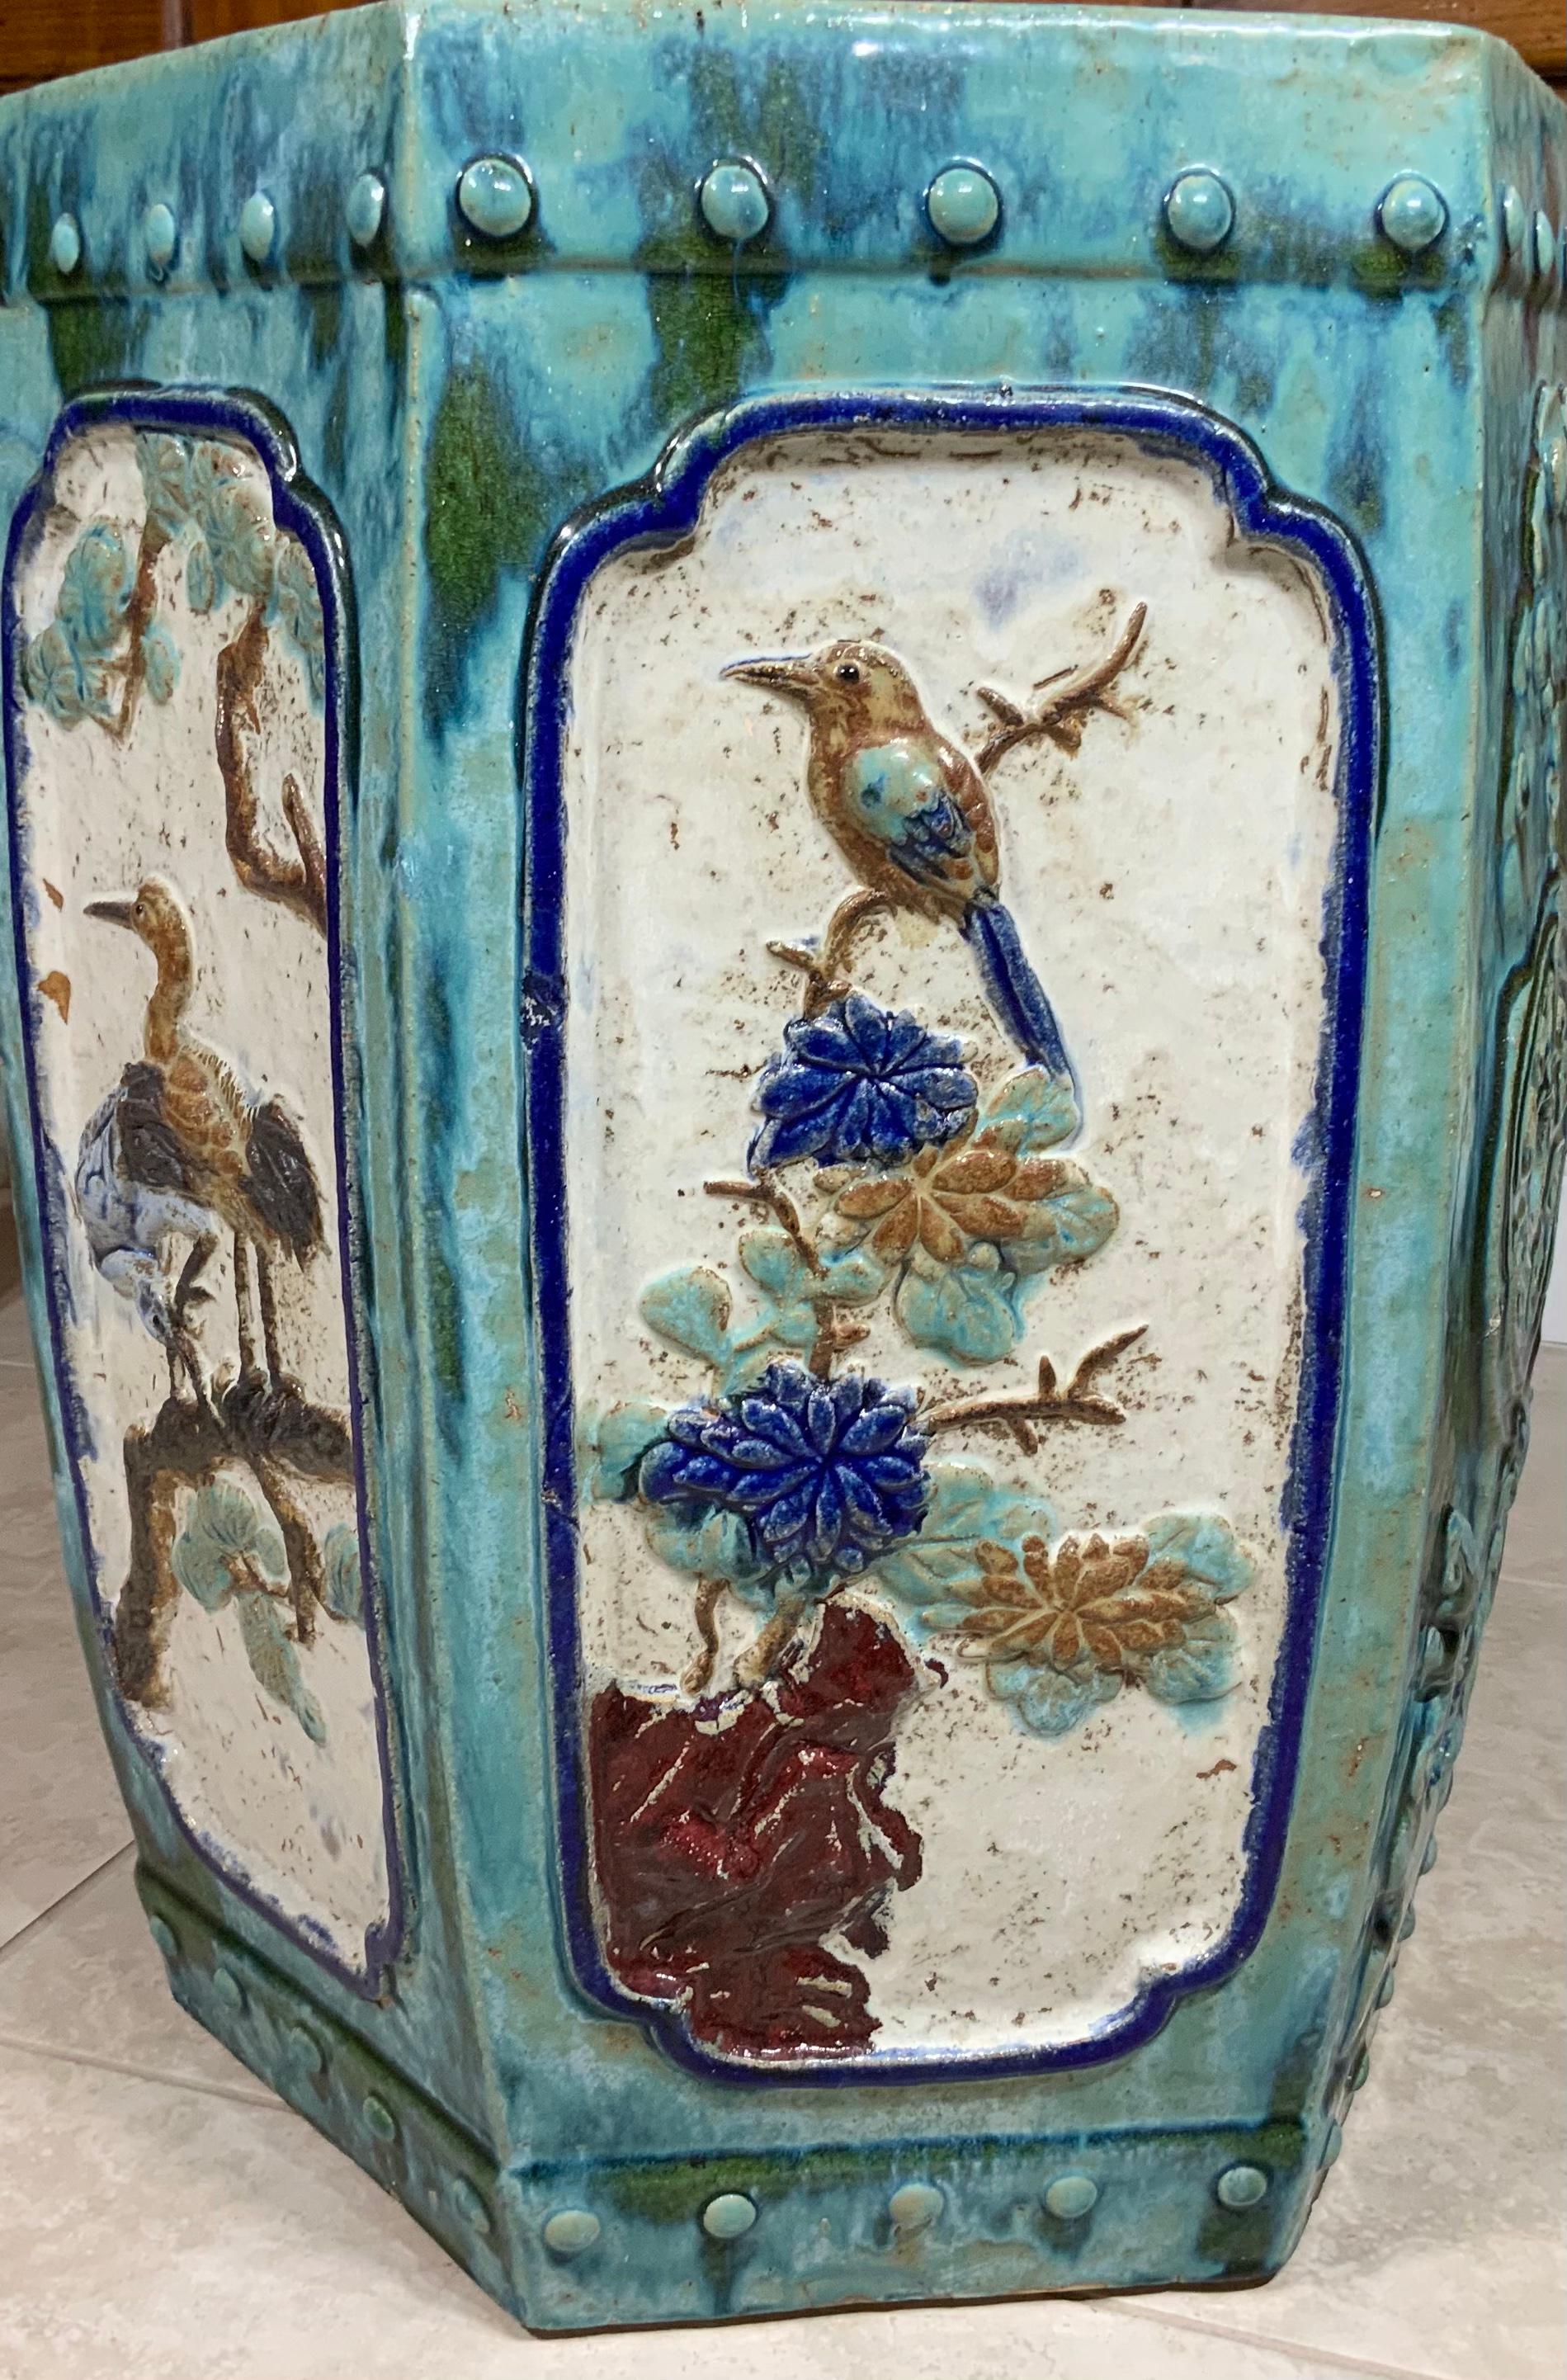 Beautiful six sides garden stool made of ceramic, hand painted and glazed of Garden scenery with flowers and birds. Could use in outdoor garden or indoor as small side table.
Some light imperfections due to baking process, see photos, structurally